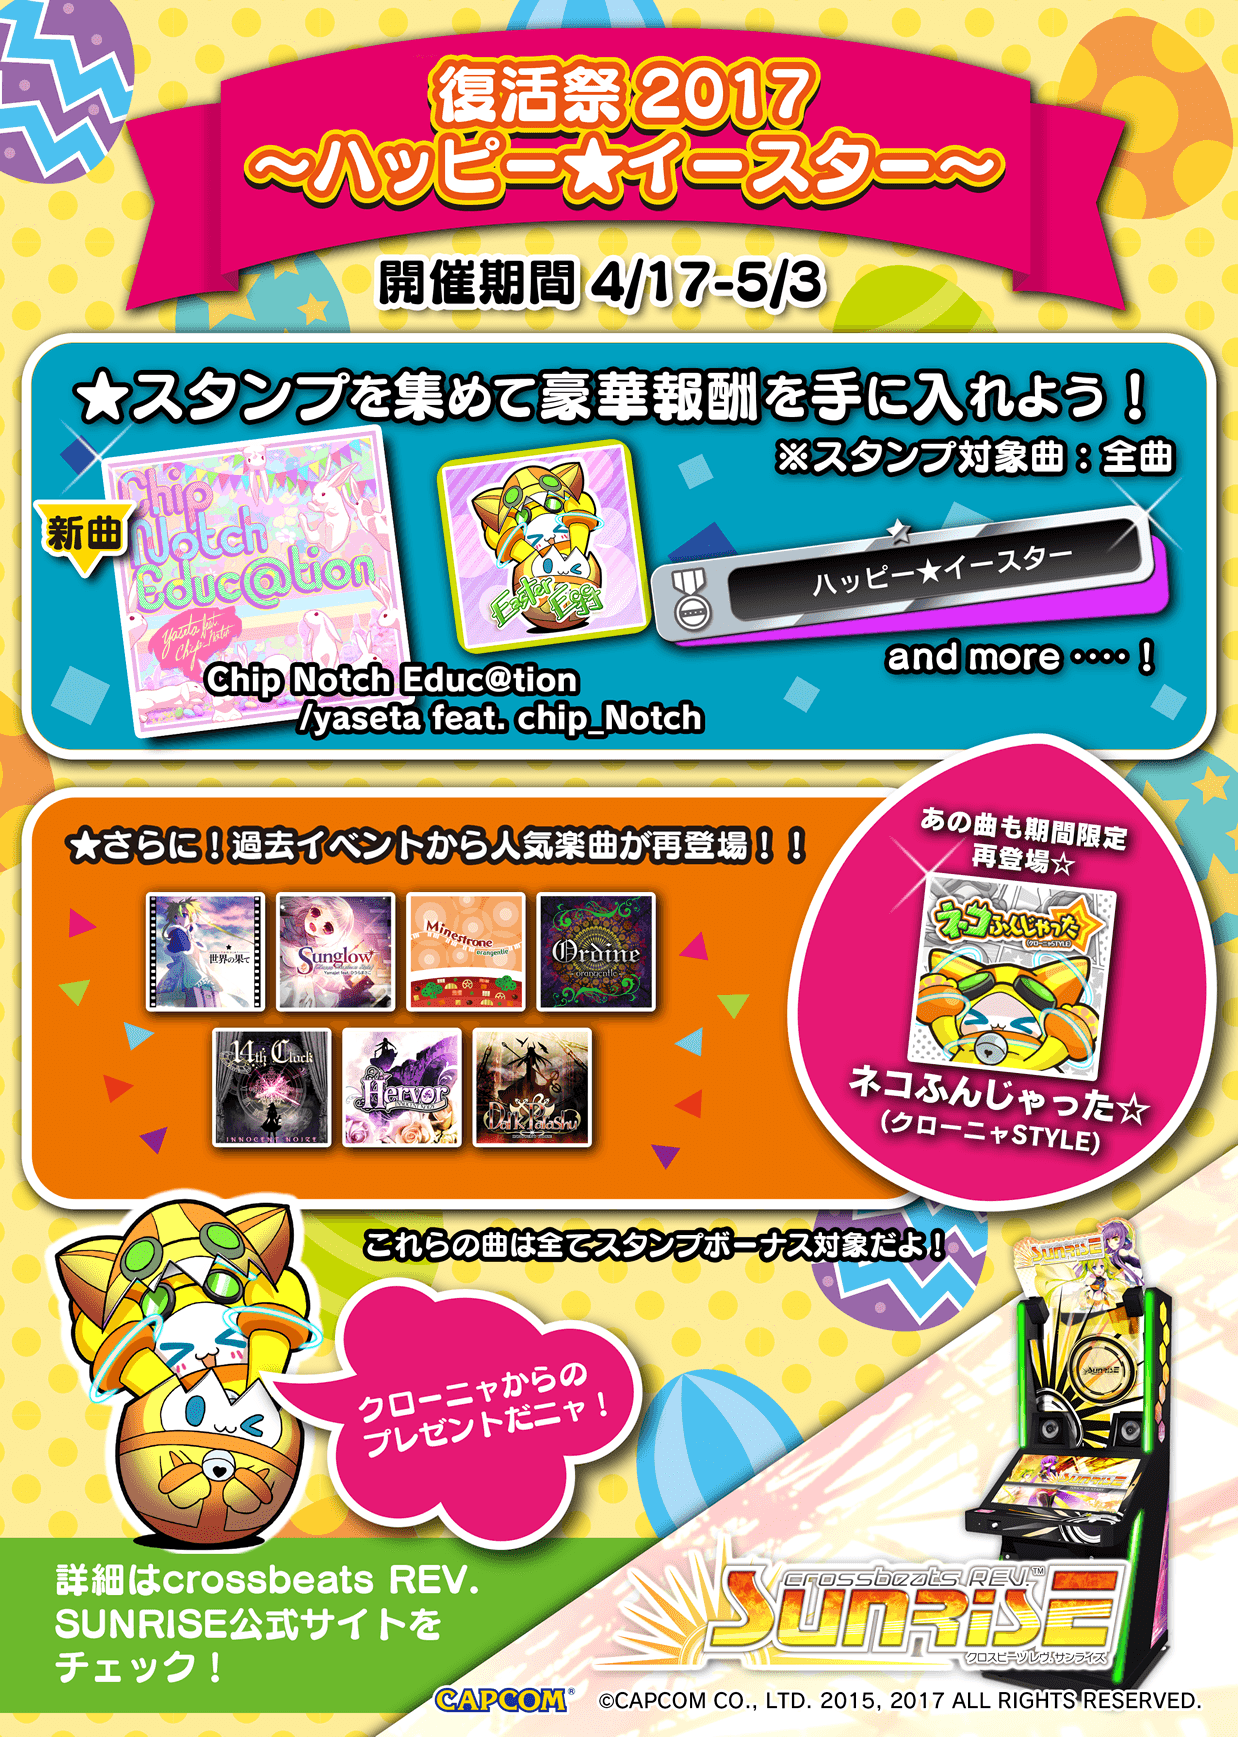 event_banner_news_easter.png